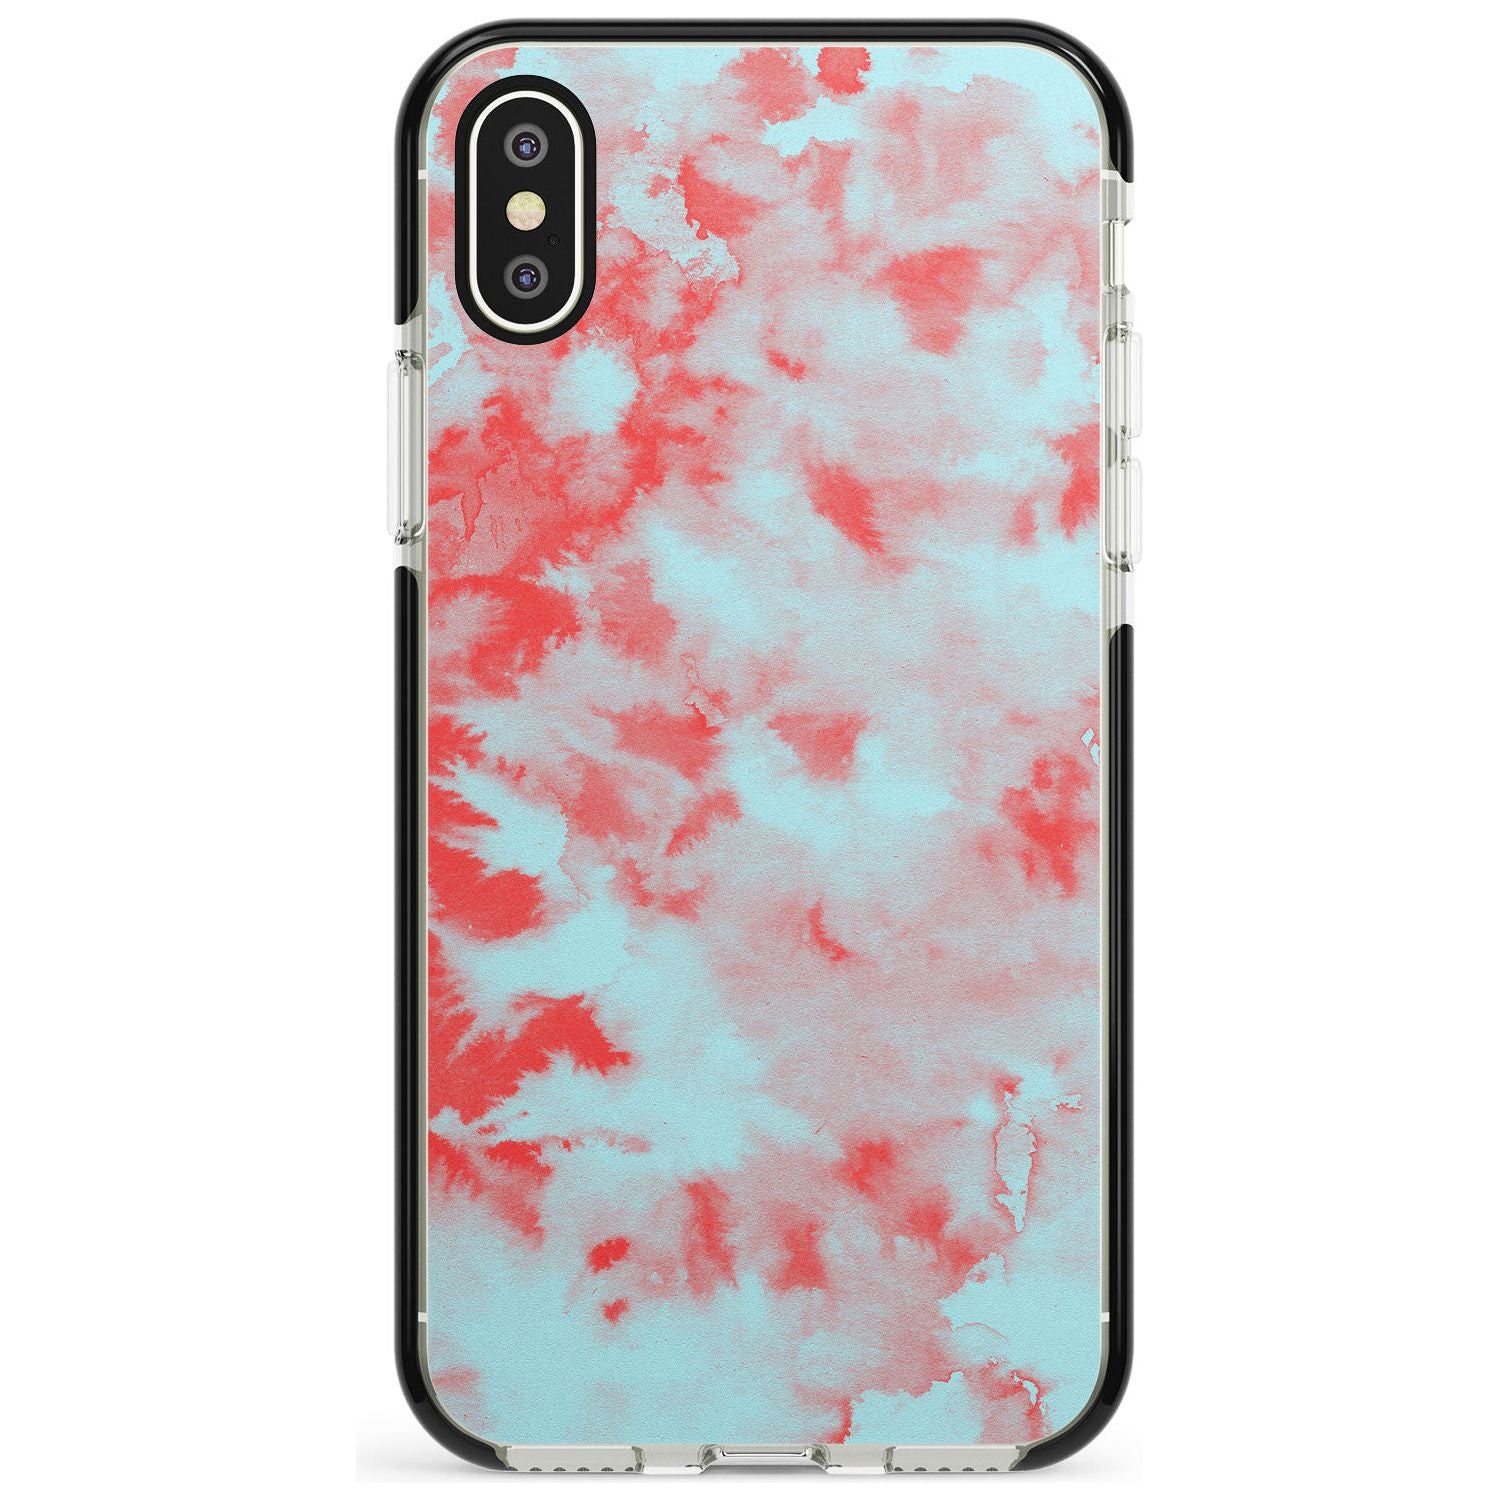 Red & Blue Acid Wash Tie-Dye Pattern Black Impact Phone Case for iPhone X XS Max XR